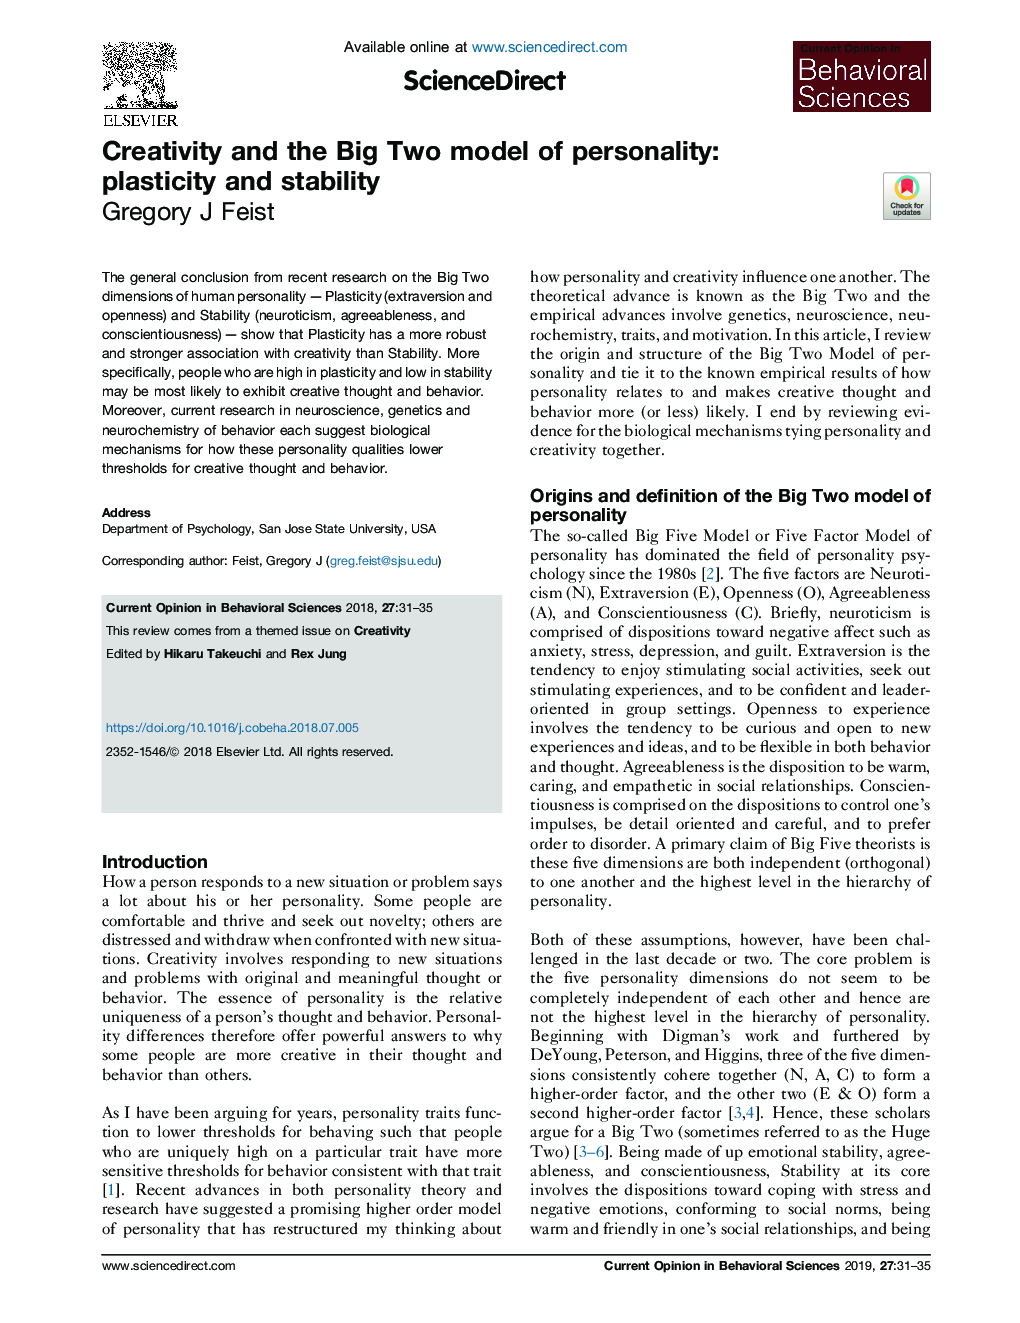 Creativity and the Big Two model of personality: plasticity and stability